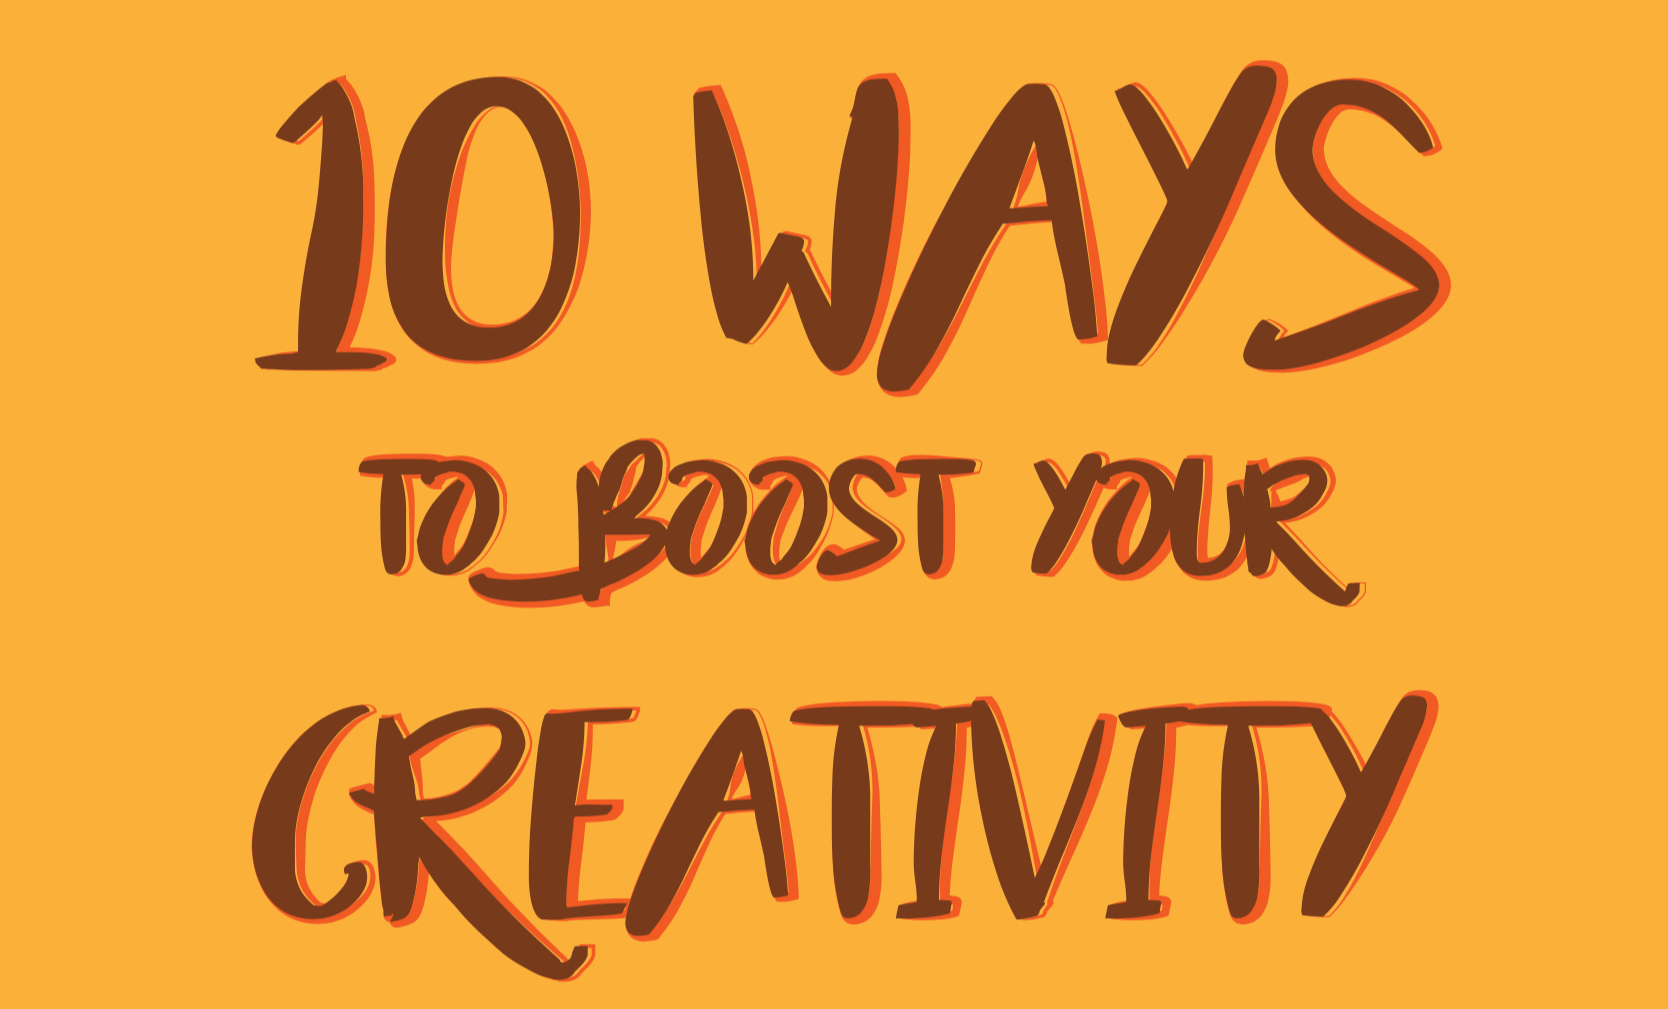 10 Ways to Boost Your Creativity: Free PDF Visualization by ANNETTE KIM